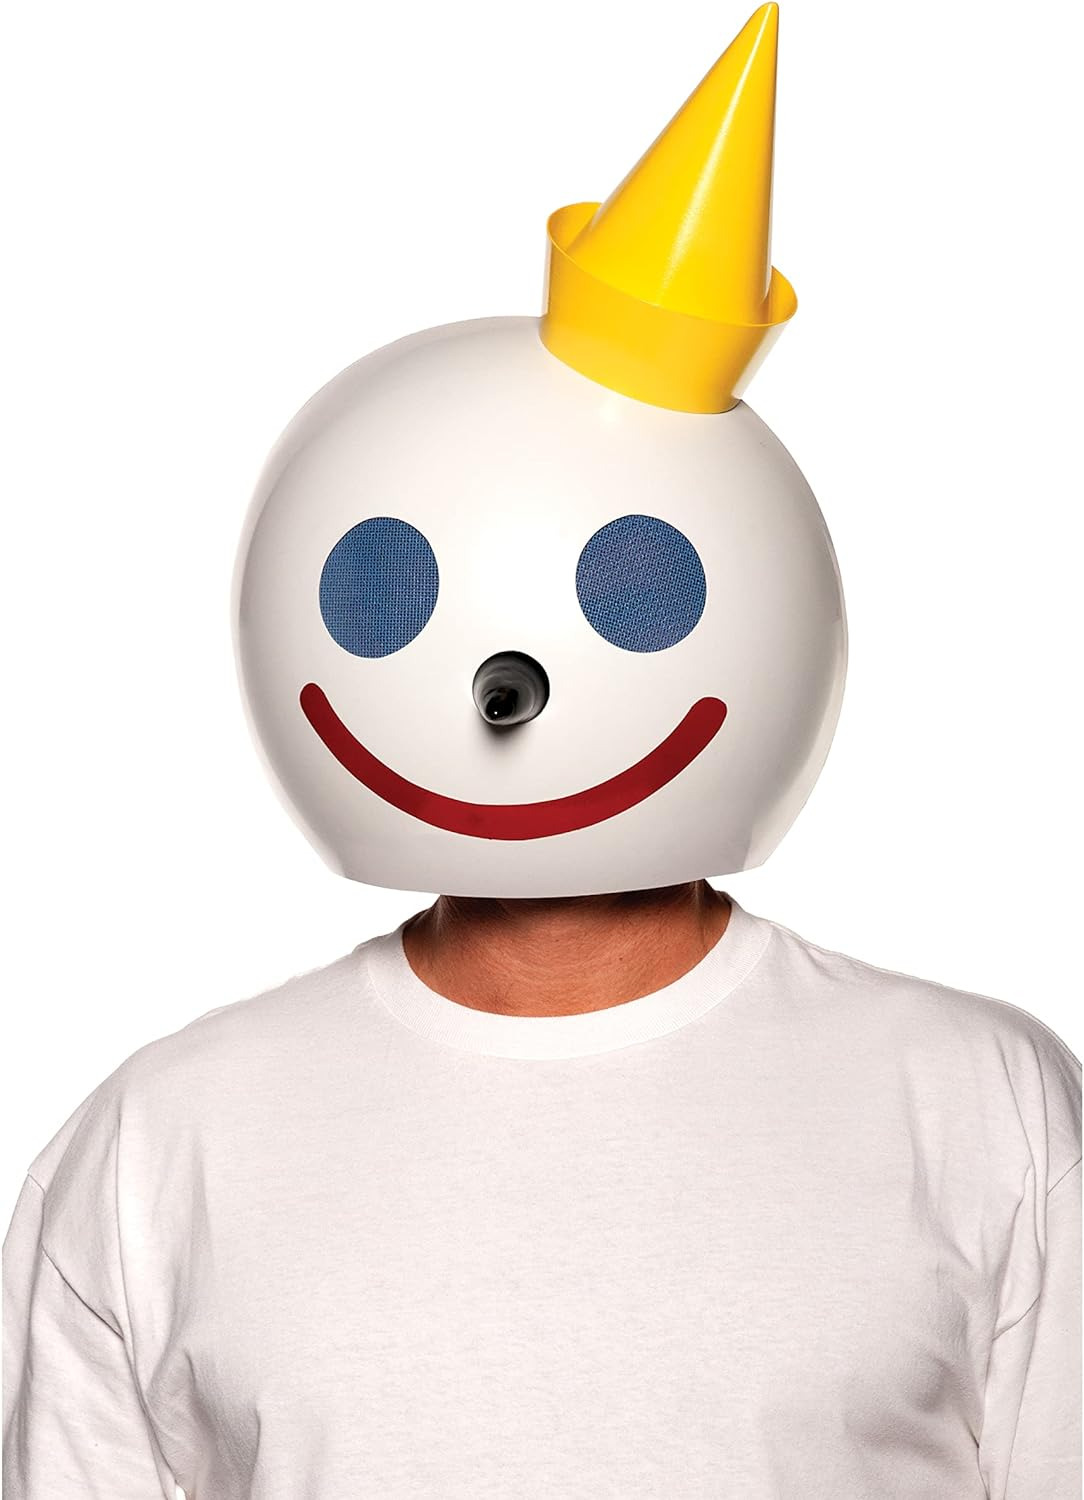 Jack Box Mascot Head - Officially Licensed Jack in the Box™ Helmet